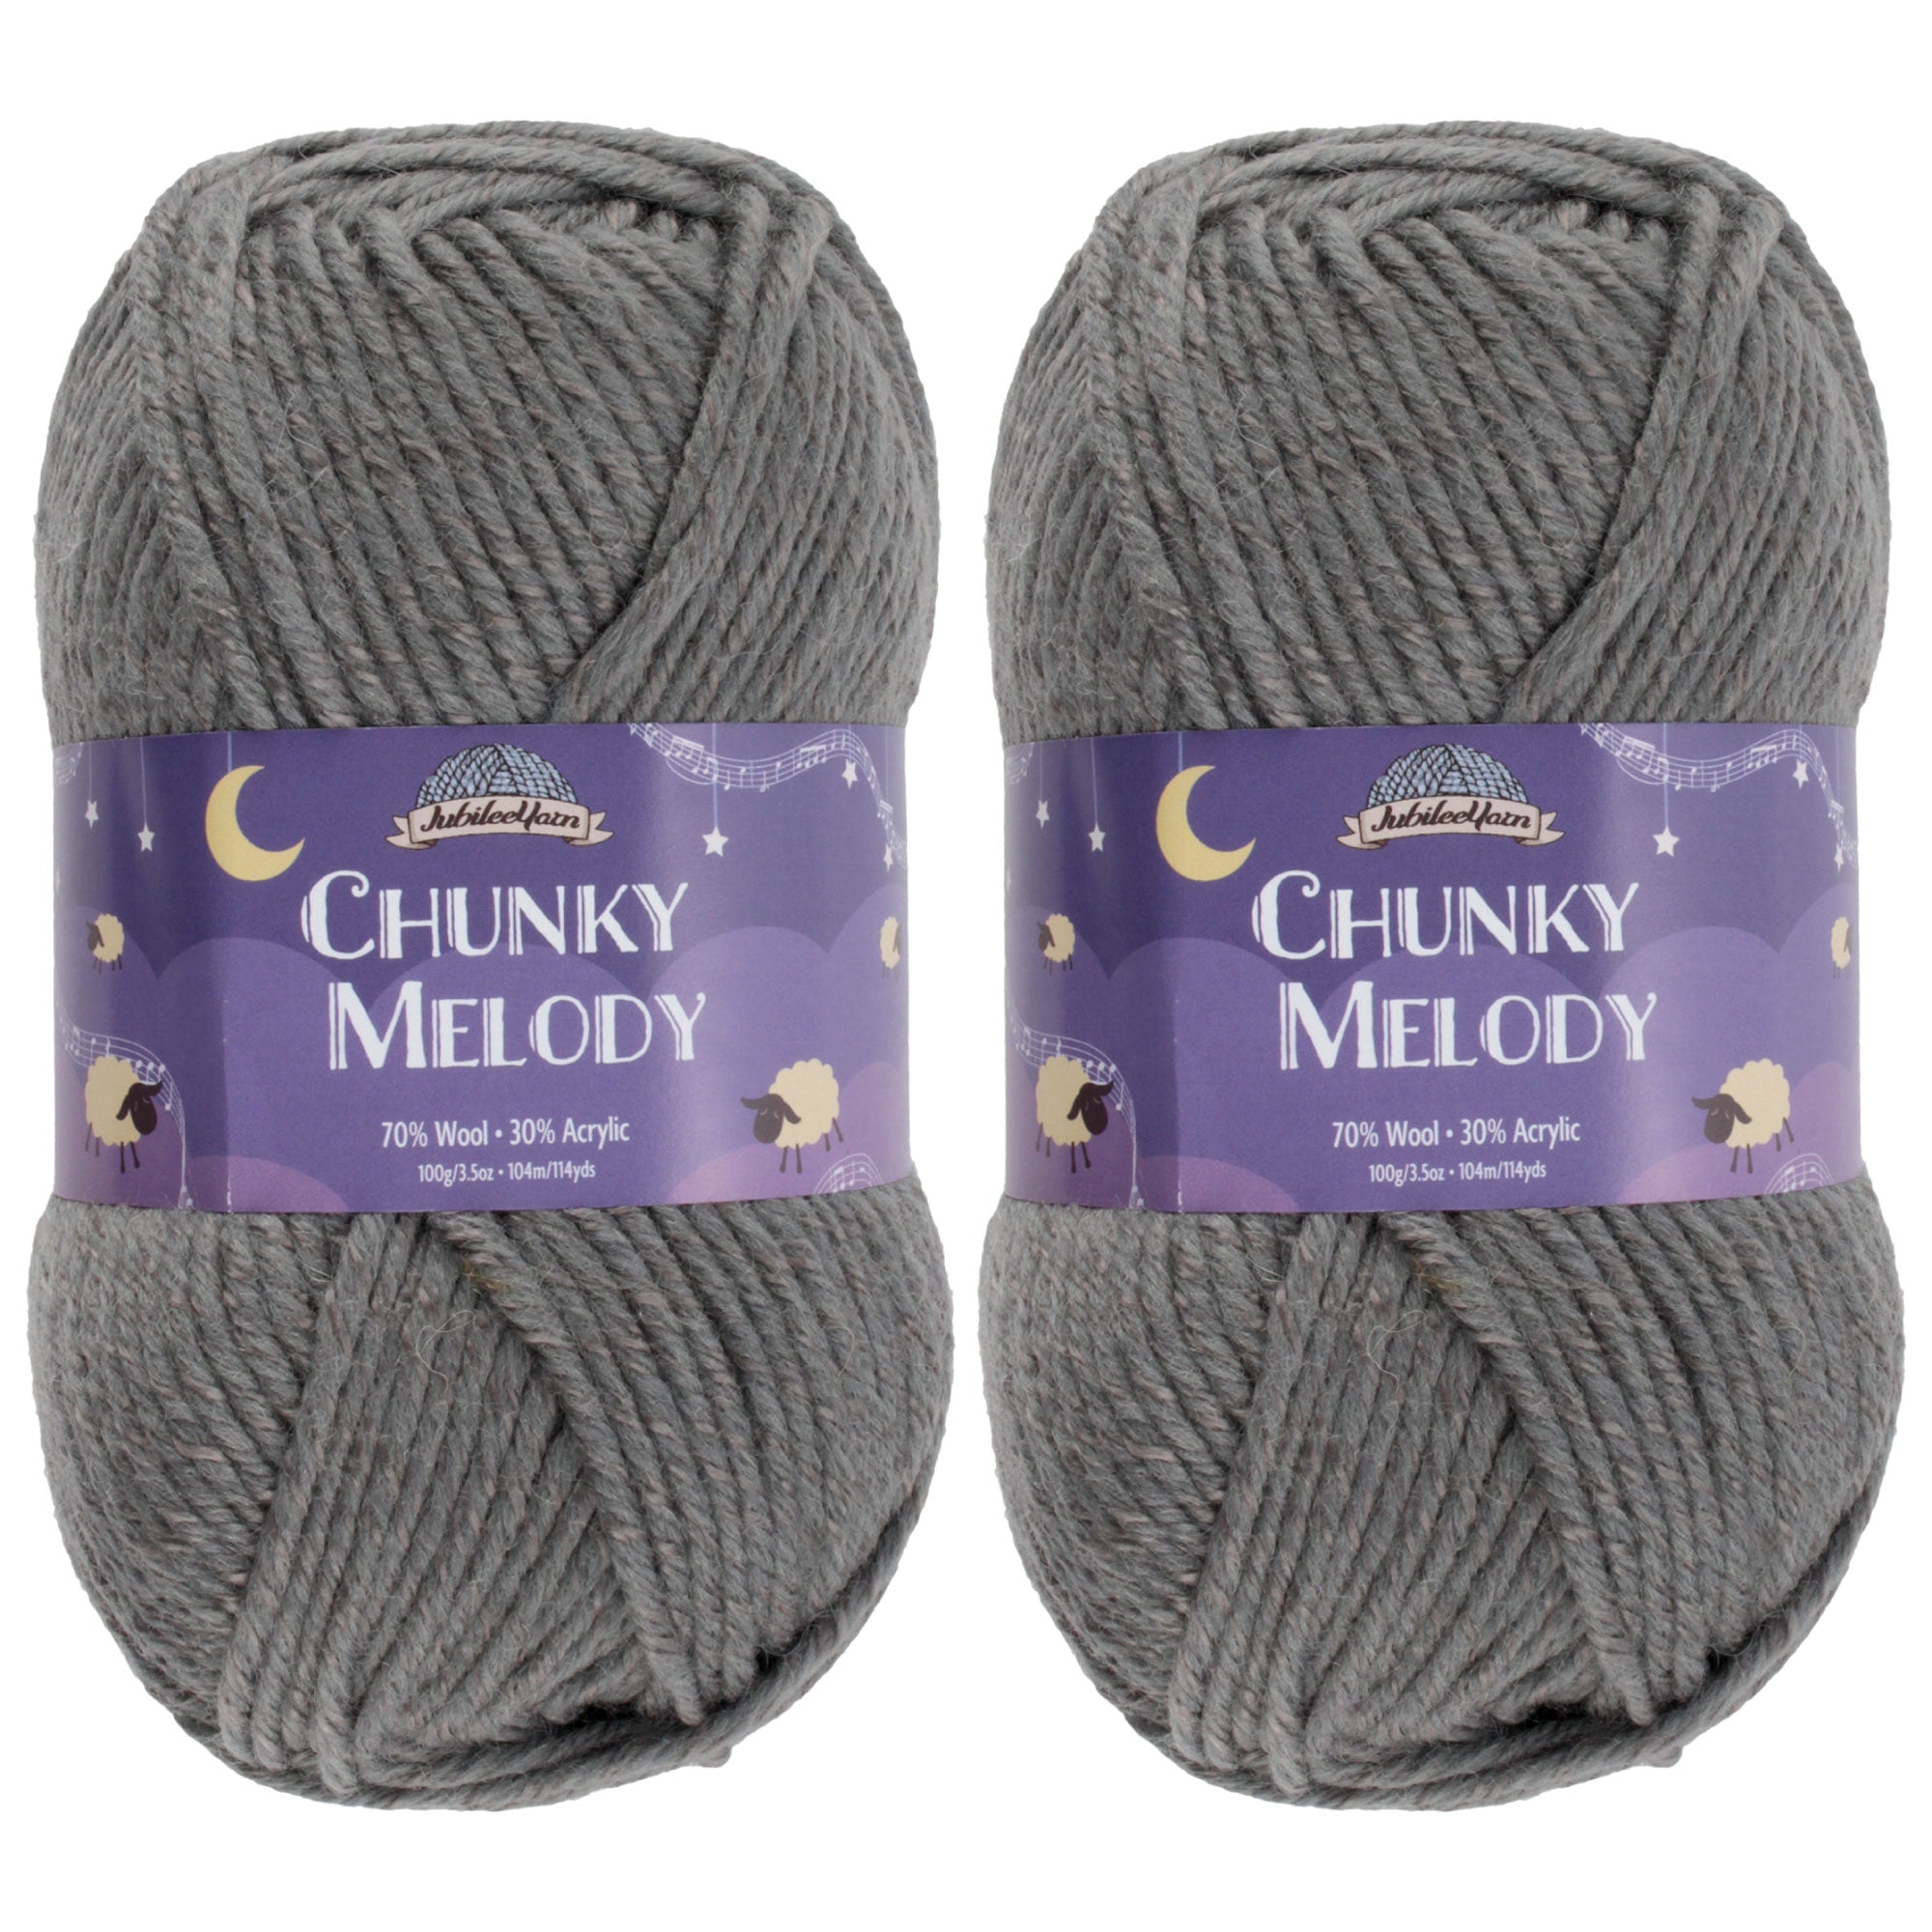 Chunky Melody Medium Weight Yarn - Juice Box - 70% Wool 30% Polyester Blend - 100g/Skein, Clear